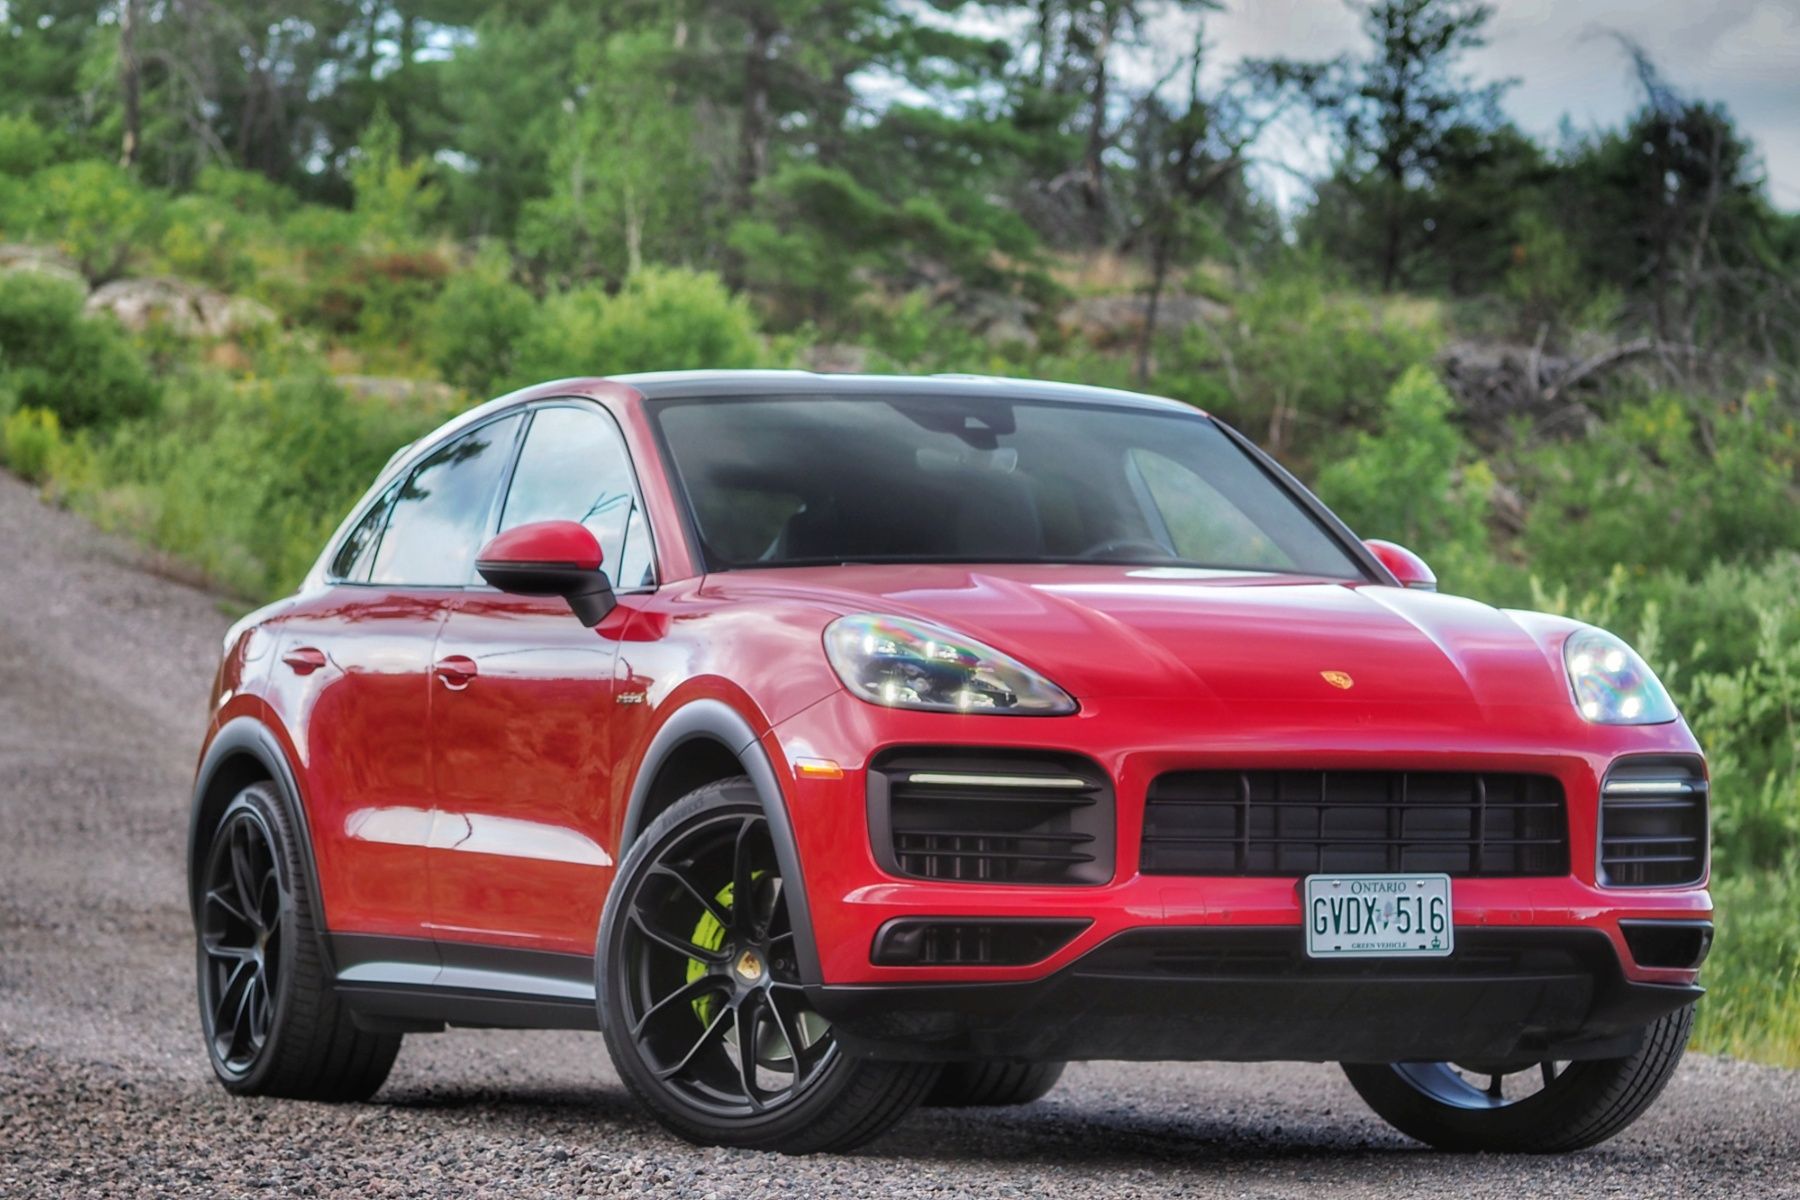 2022 Porsche Cayenne Coupe Prices, Reviews, and Photos - MotorTrend